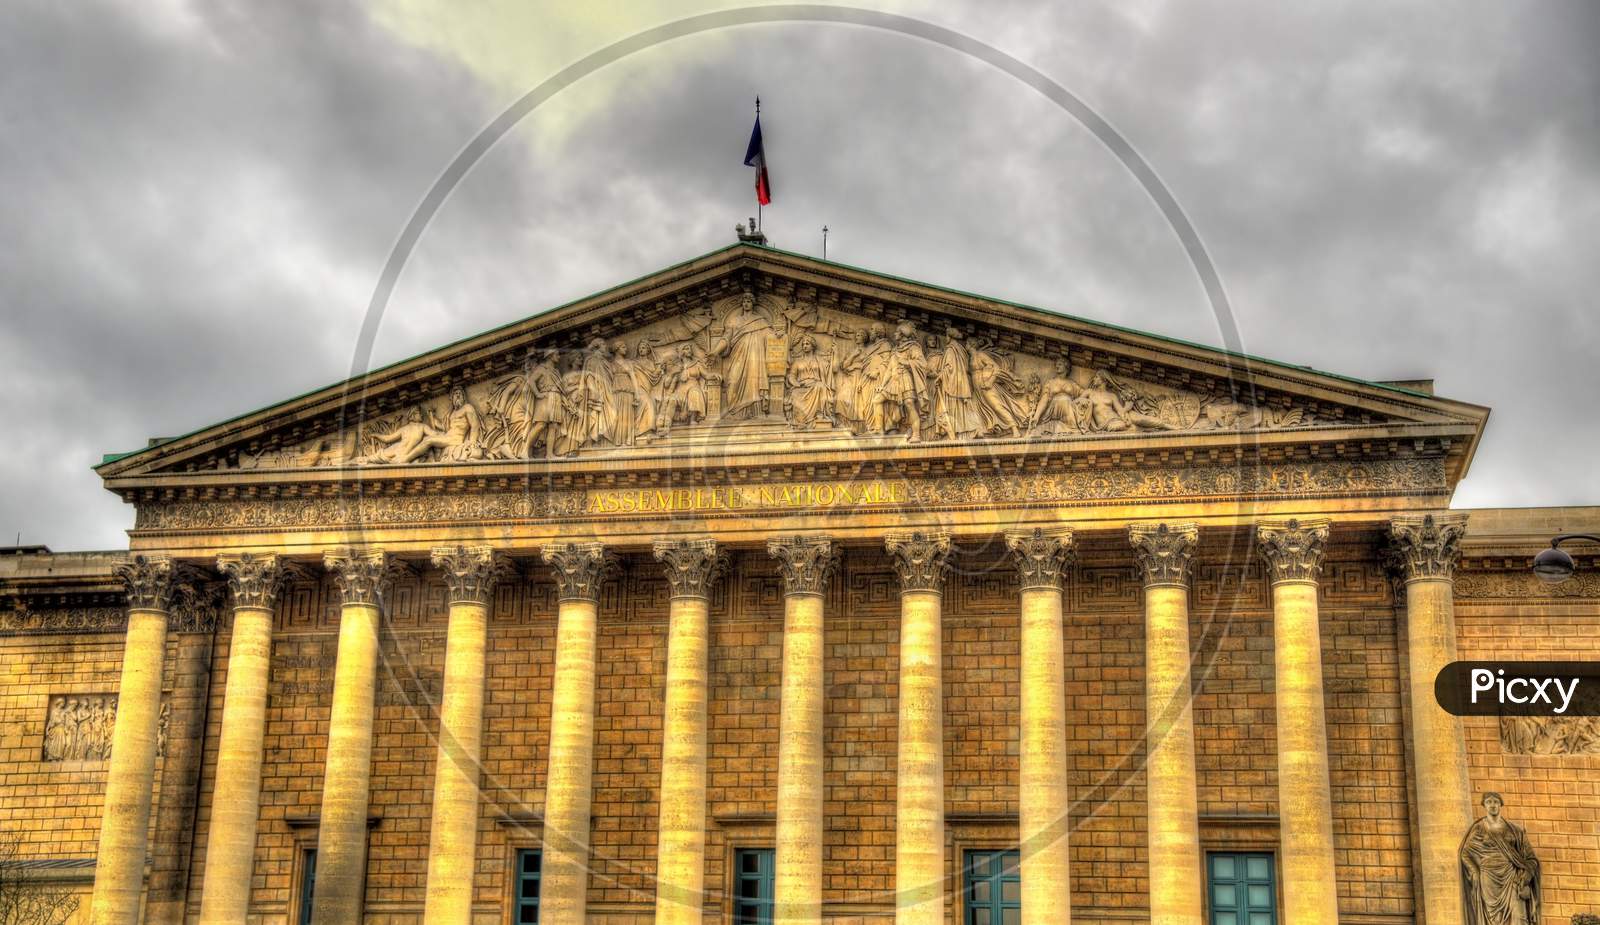 Palais Bourbon - National Assembly Of France In Paris